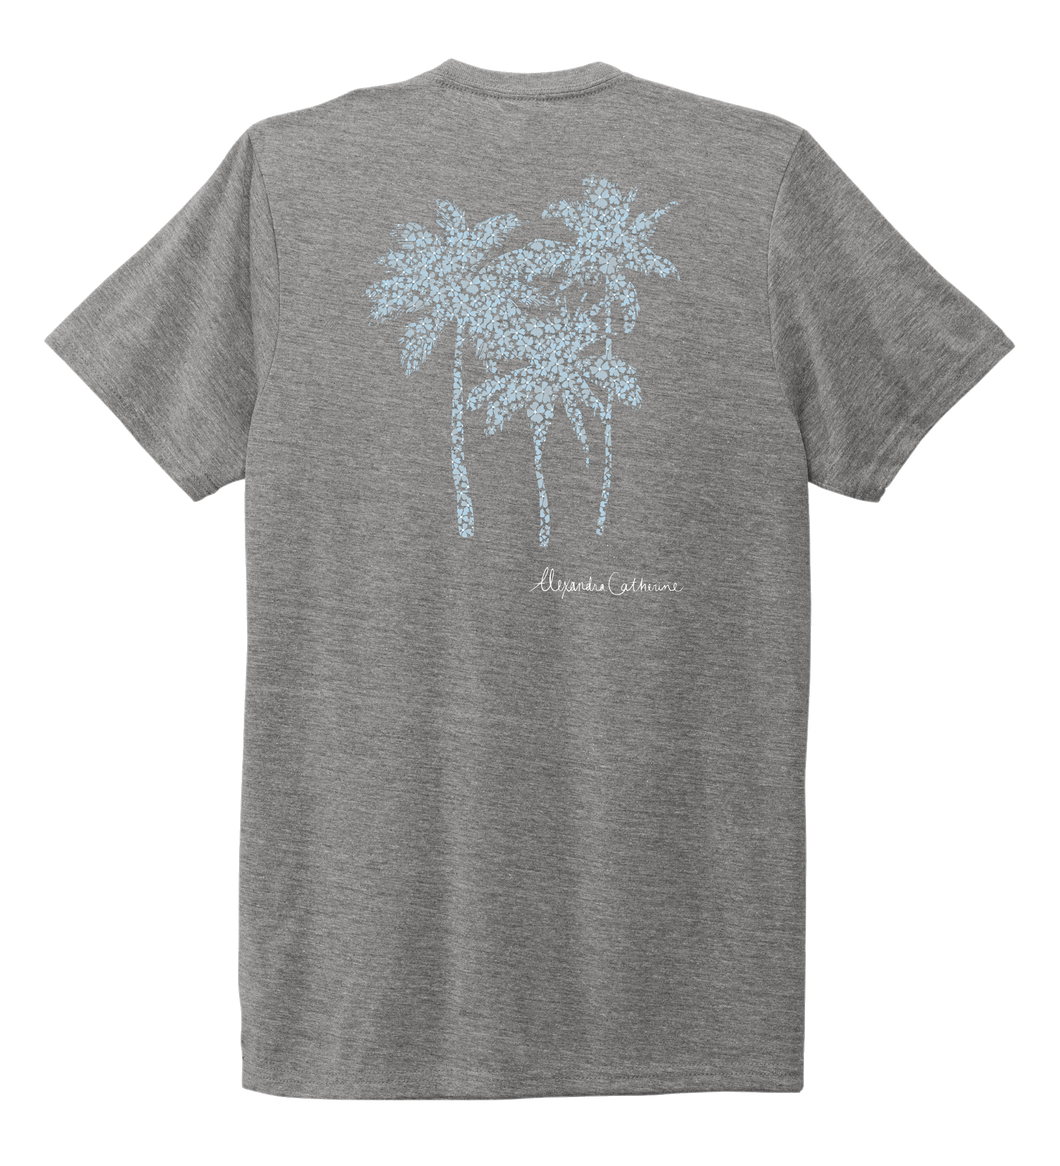 Alexandra Catherine, Palm Trees, Unisex Crew Neck T-shirt in Oyster Grey